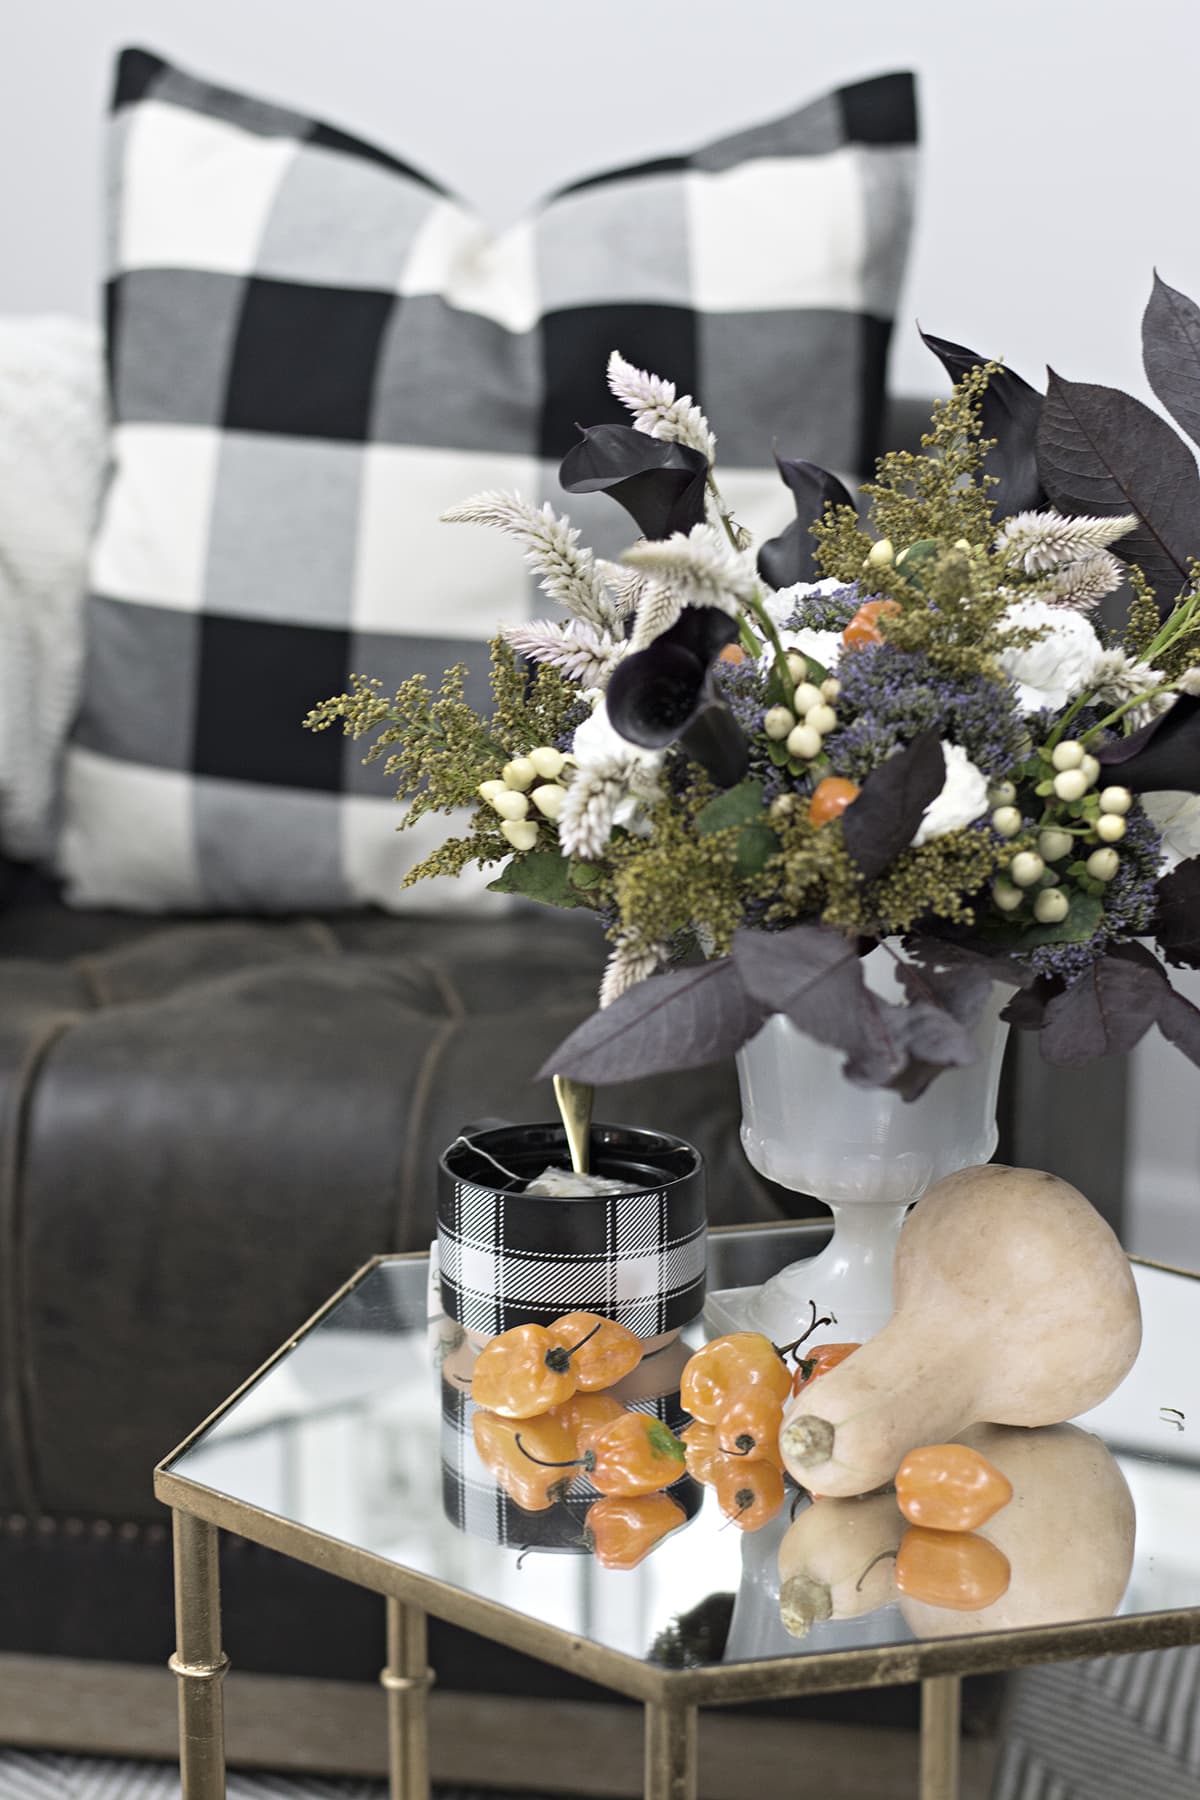 flower arrangement with black calla Lillies, orange hot peppers, in addition to the white grasses, white Hypericum Berries, golden rod, and purple flowers on coffee table